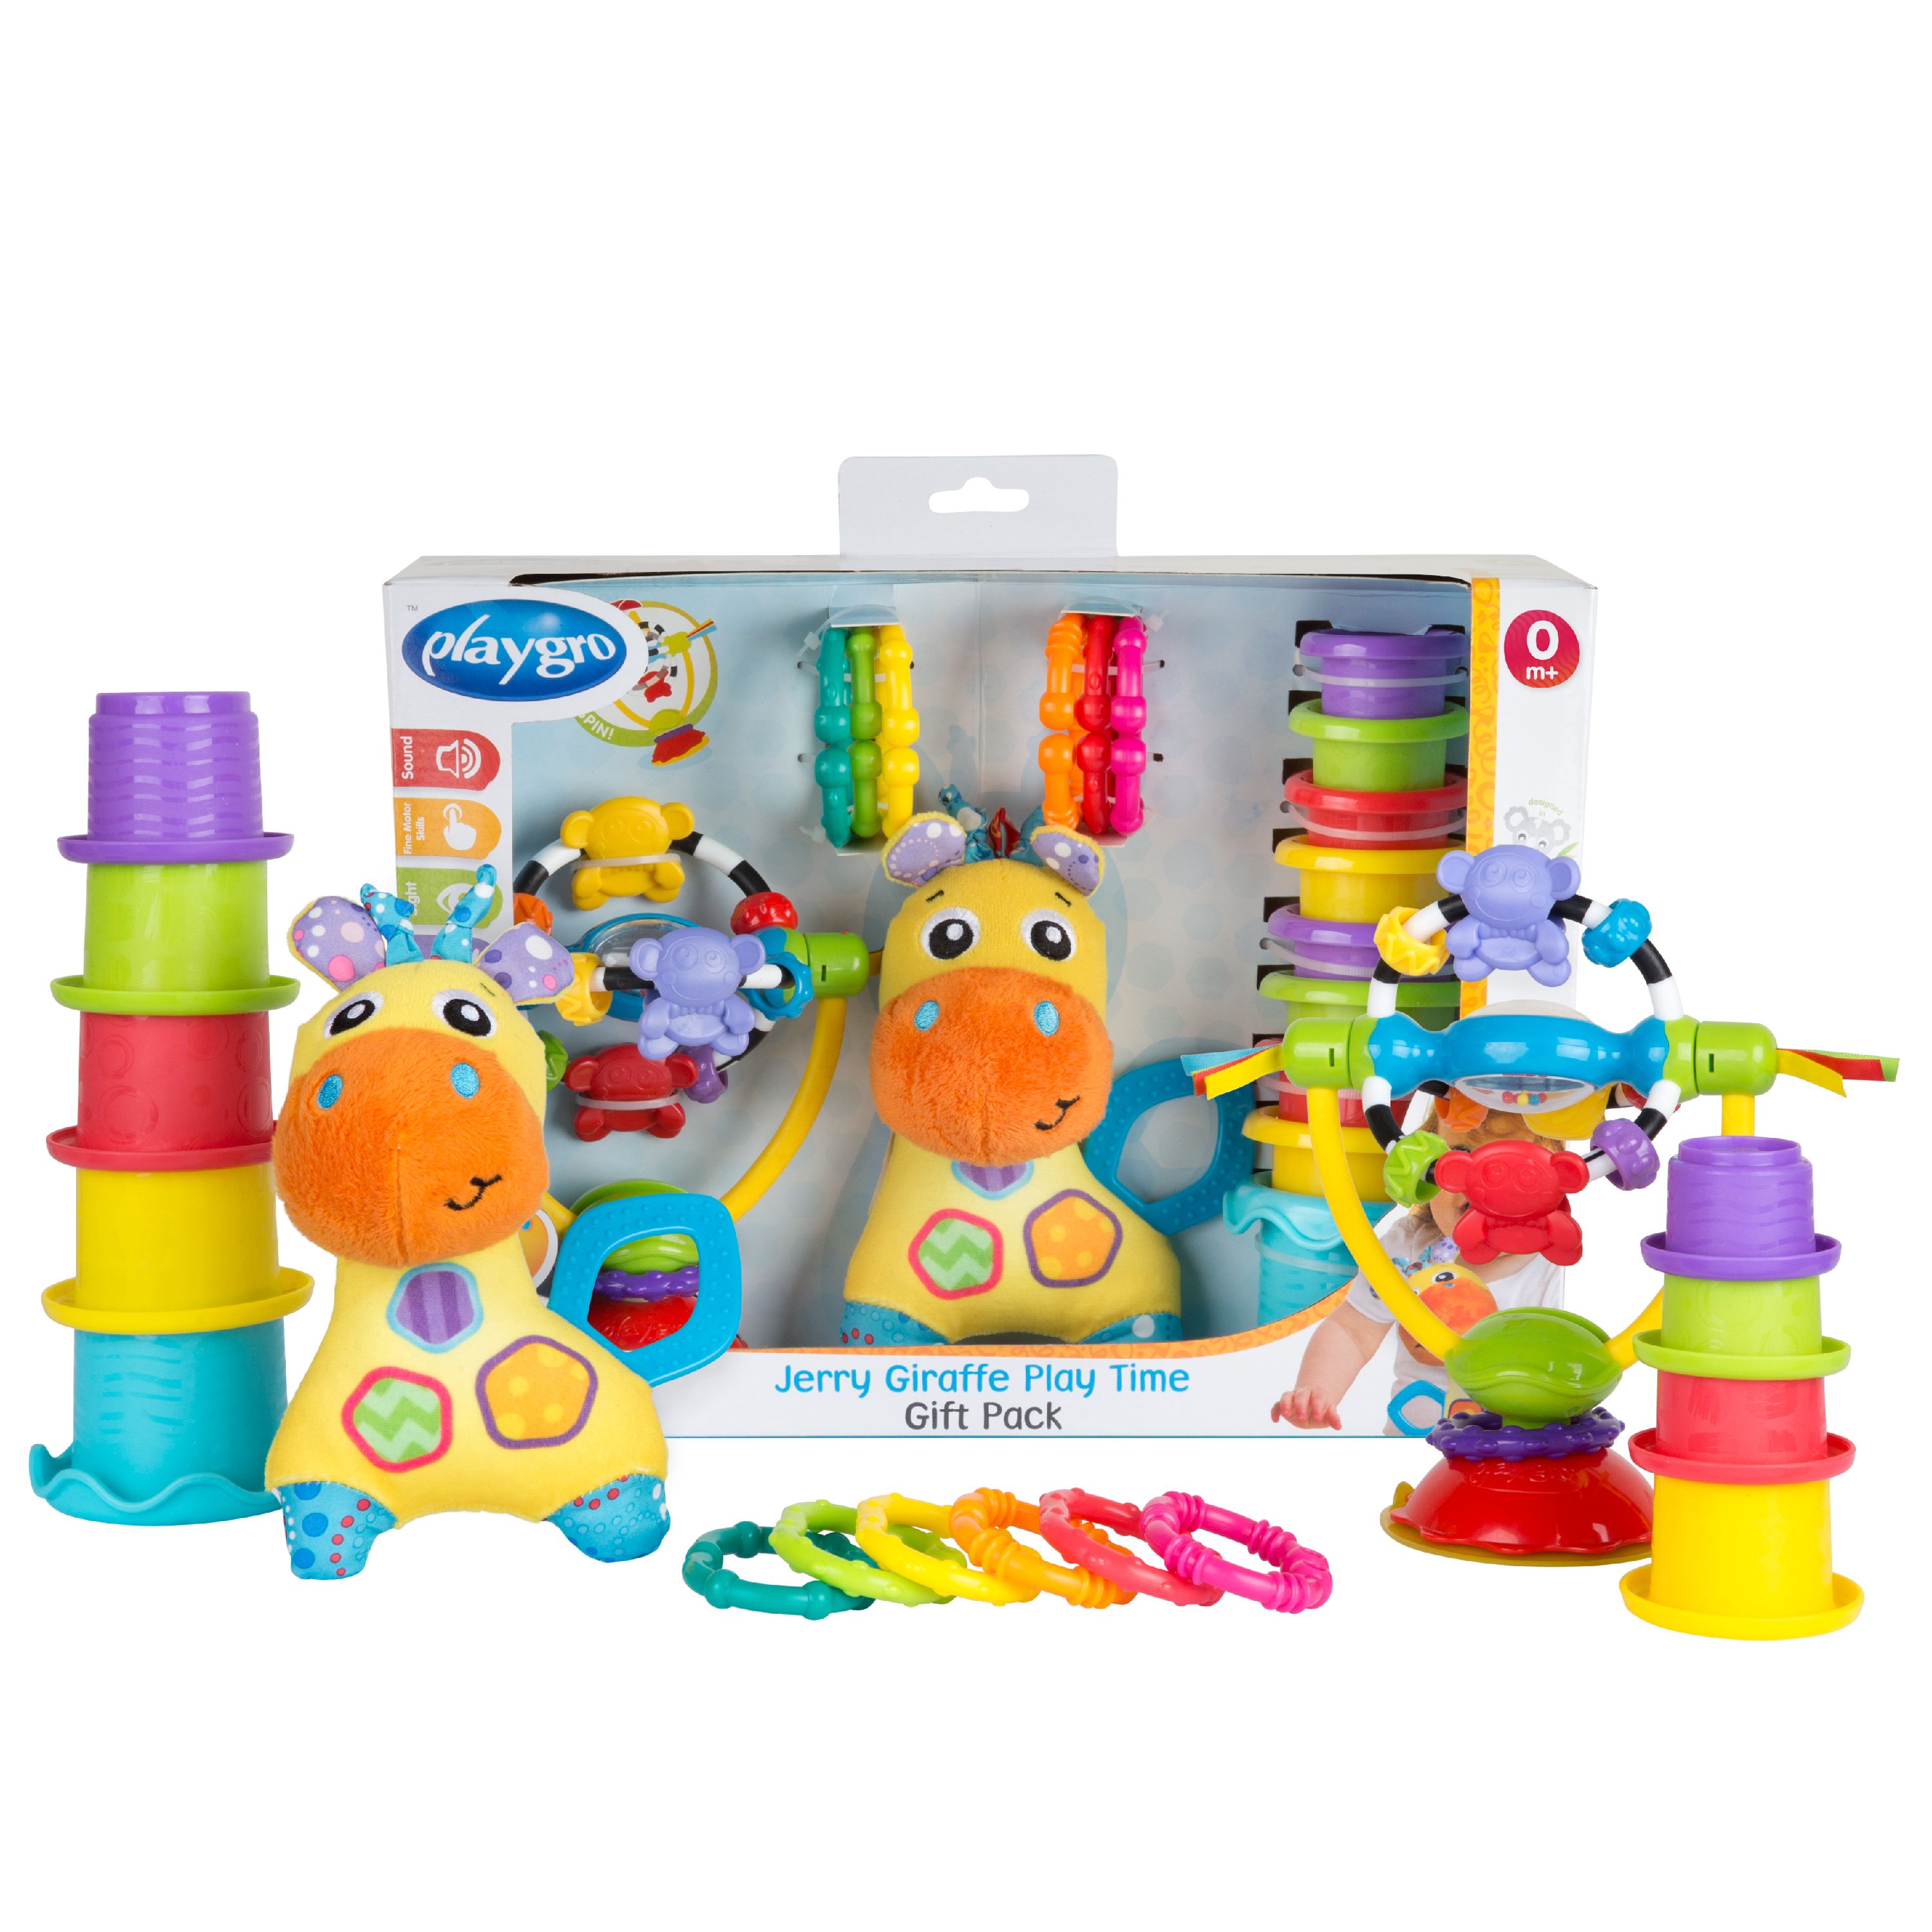 Playgro Jerry Giraffe Play Time Gift Pack Baby Toy Gift Pack, 17 Piece Set, 6 Months and Up - image 1 of 14